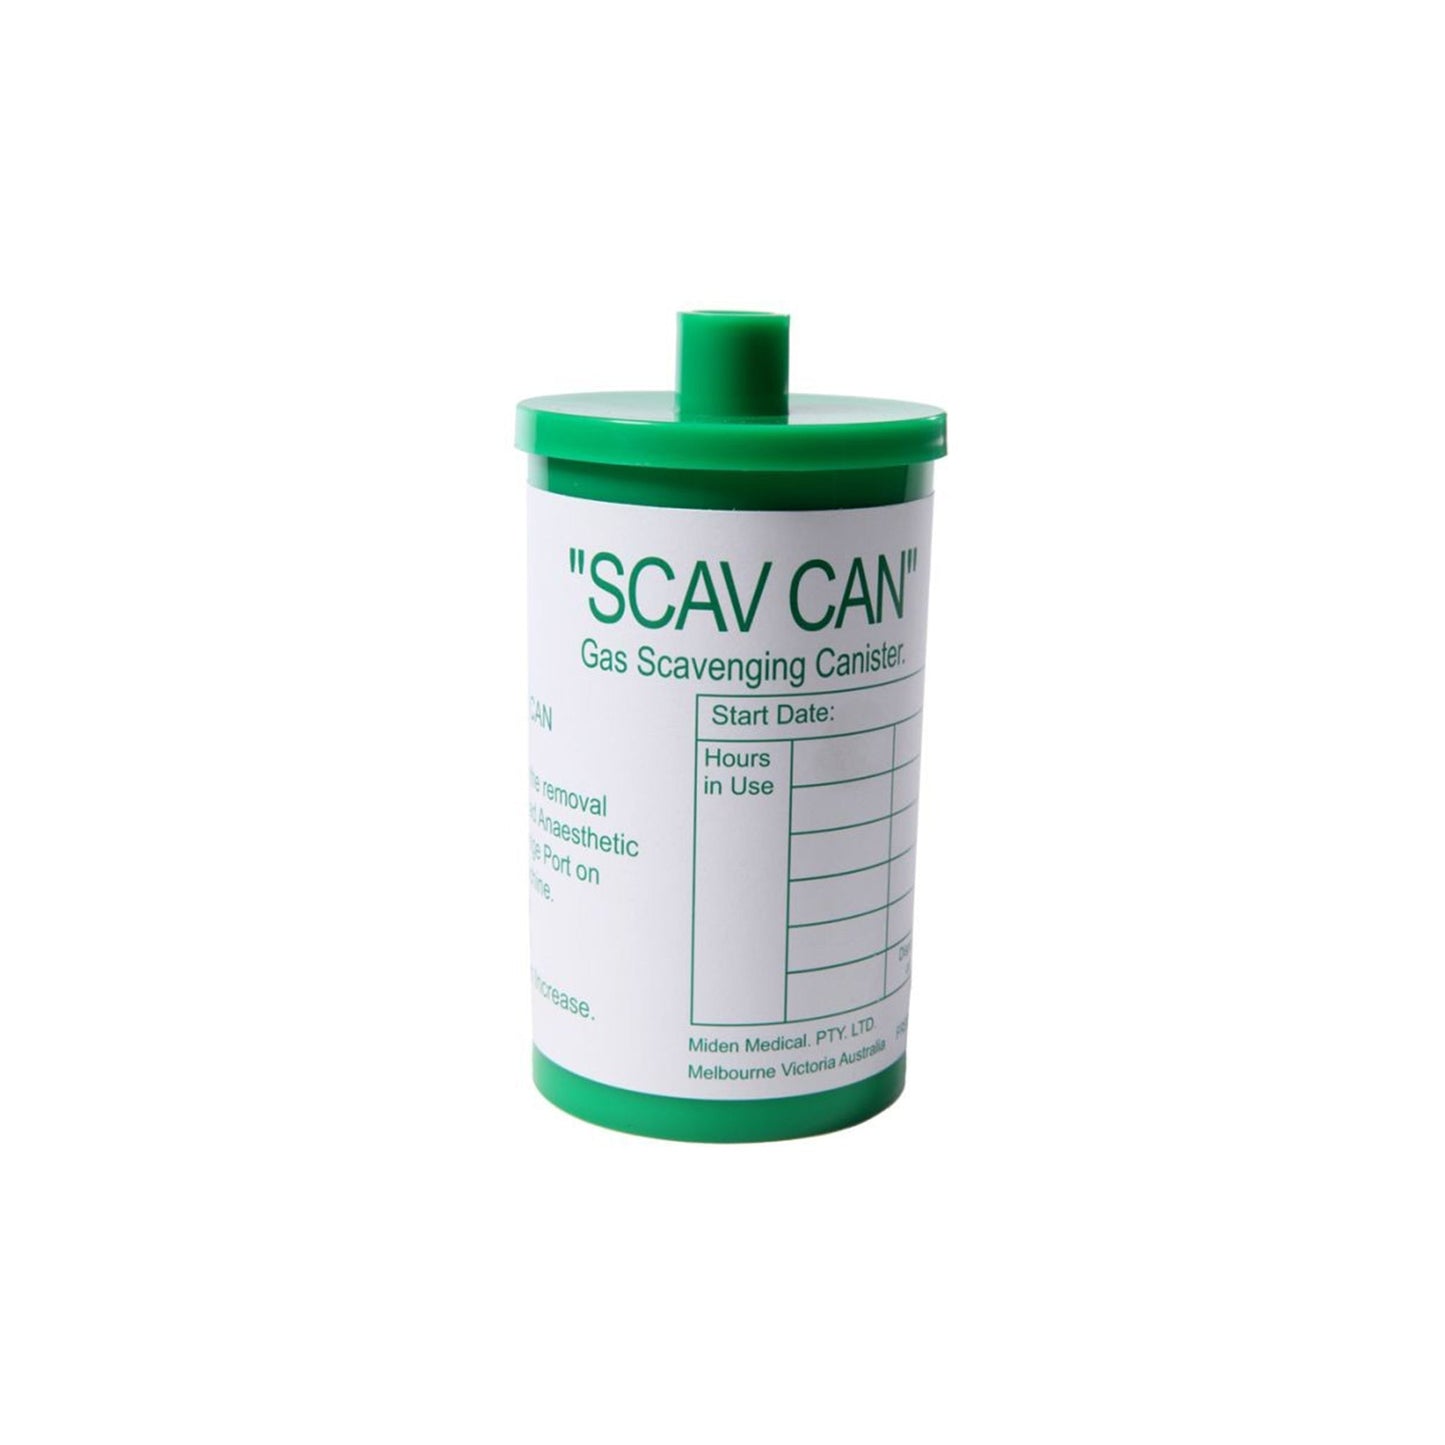 ScavCan Scavenge Canister